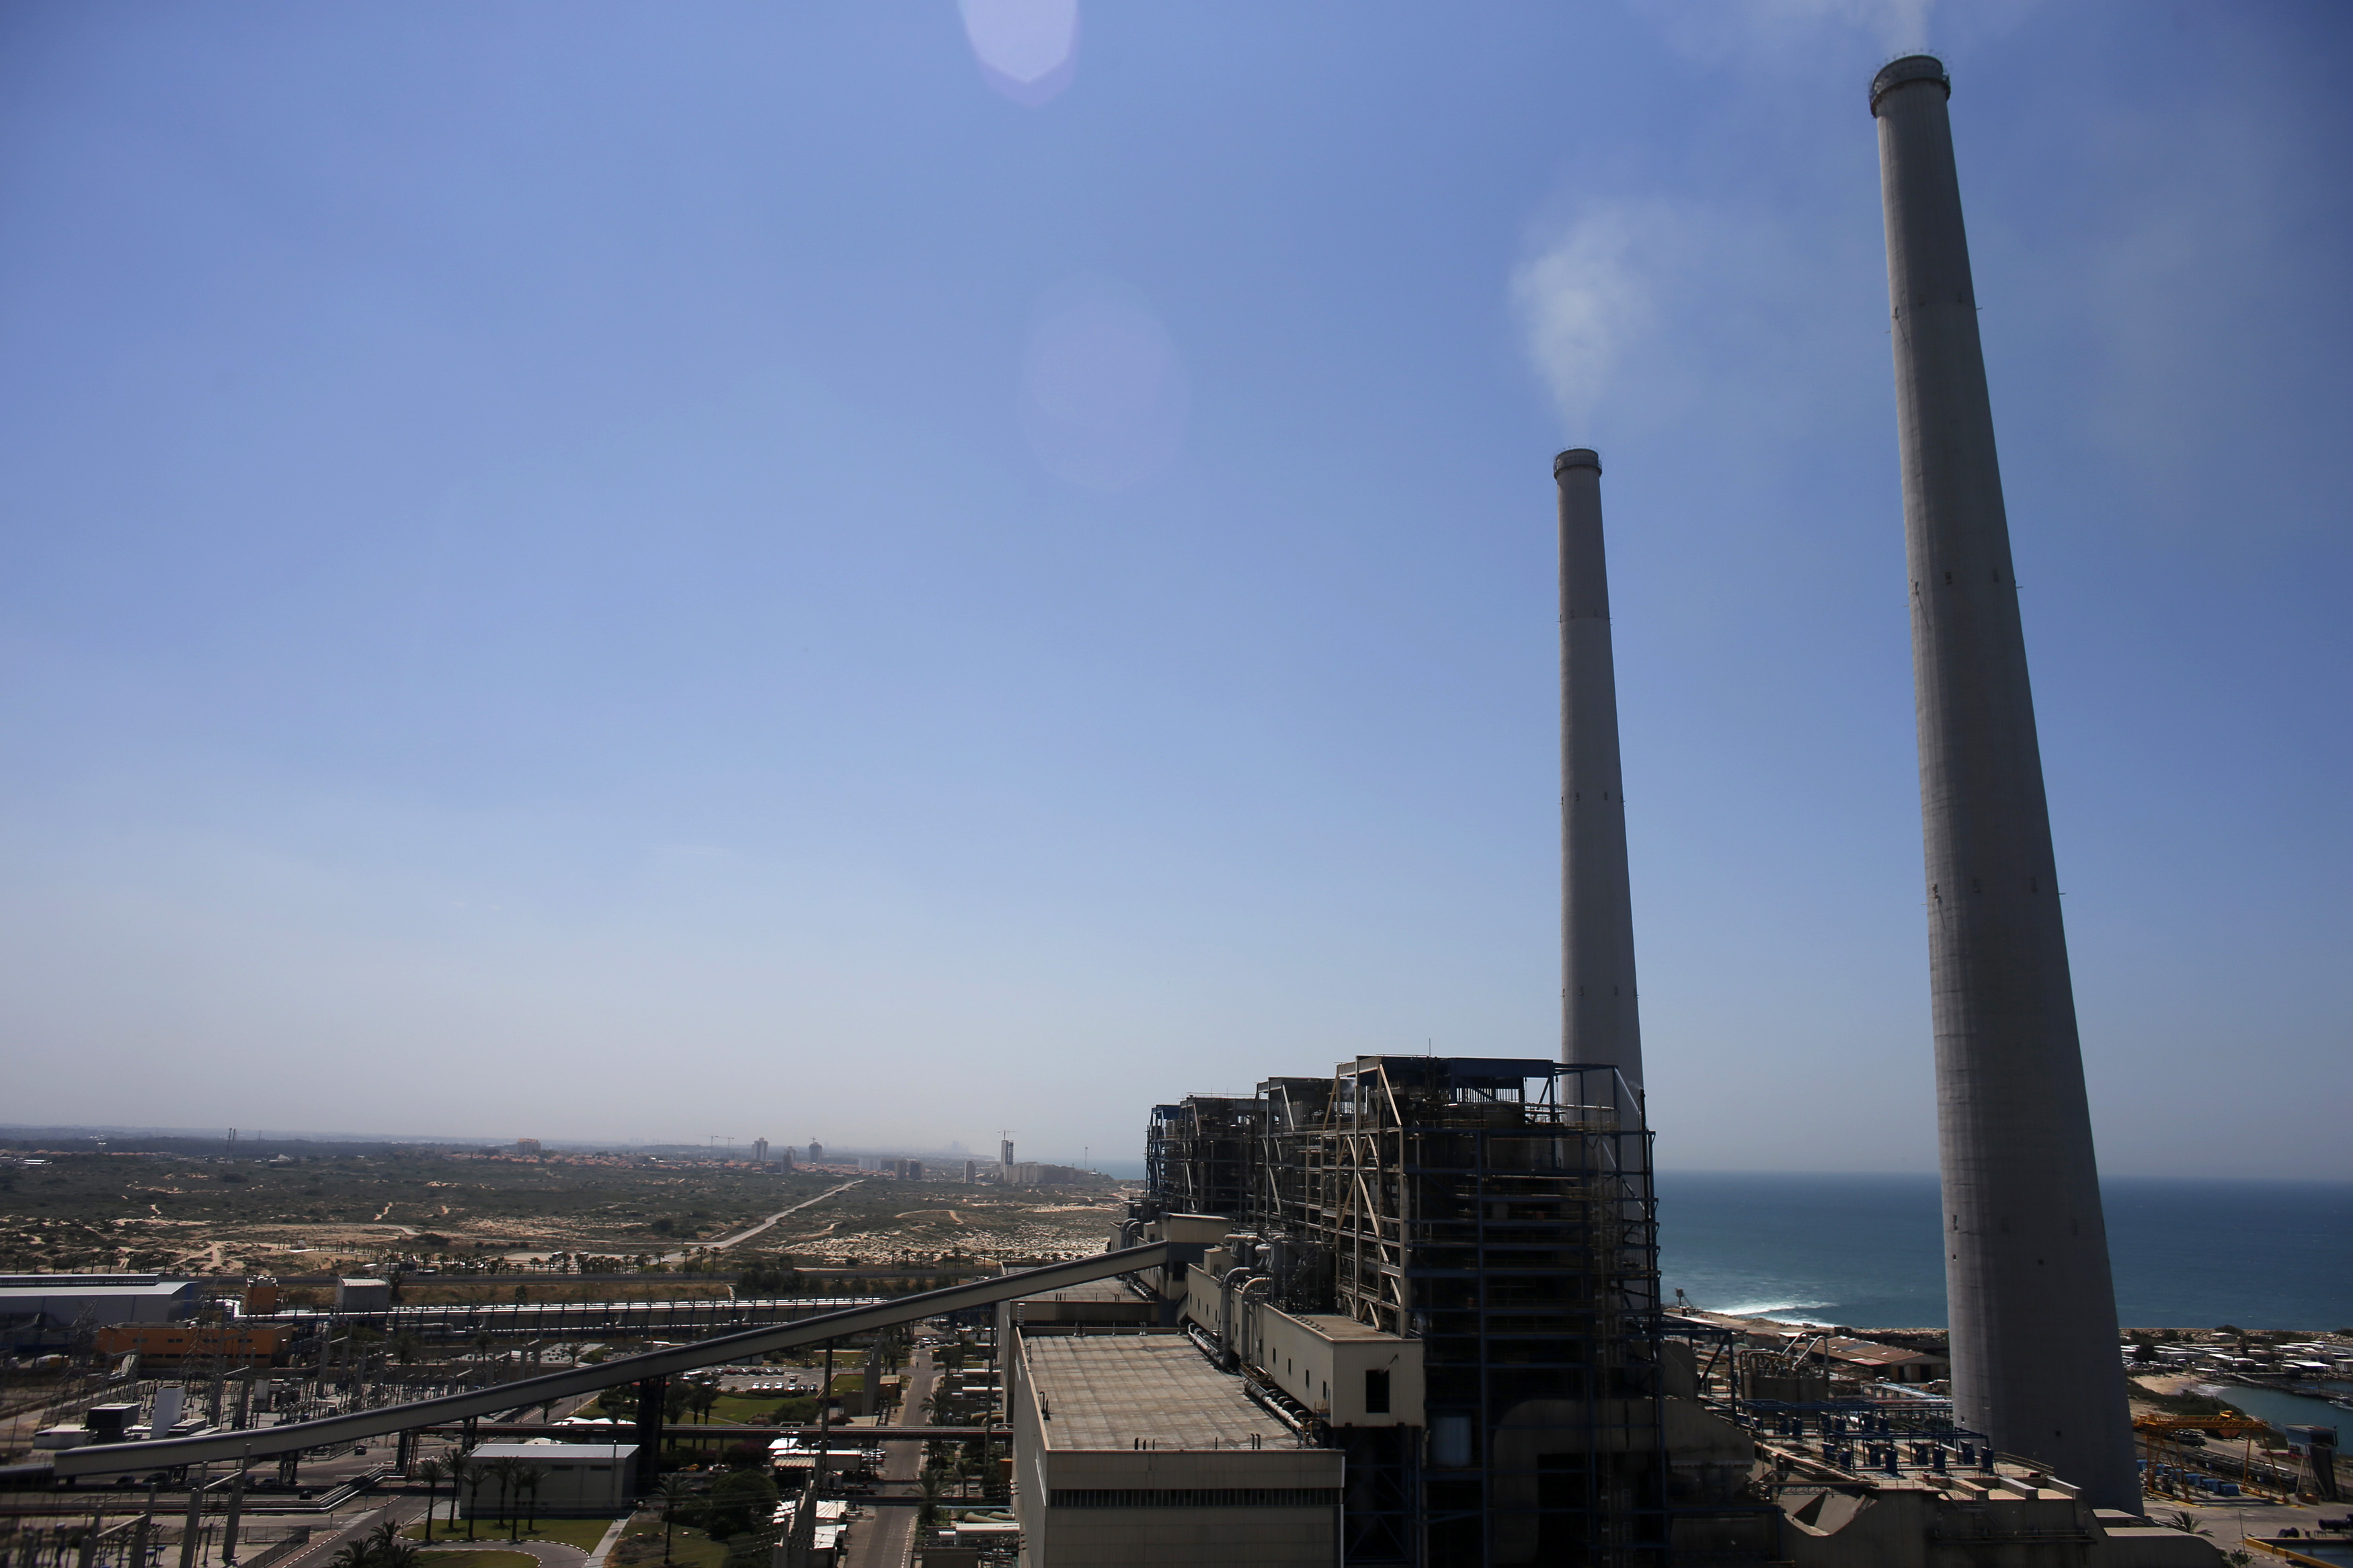 A general view of Israel Electric Corp's power station in seen on the Mediterranean coast near Hadera